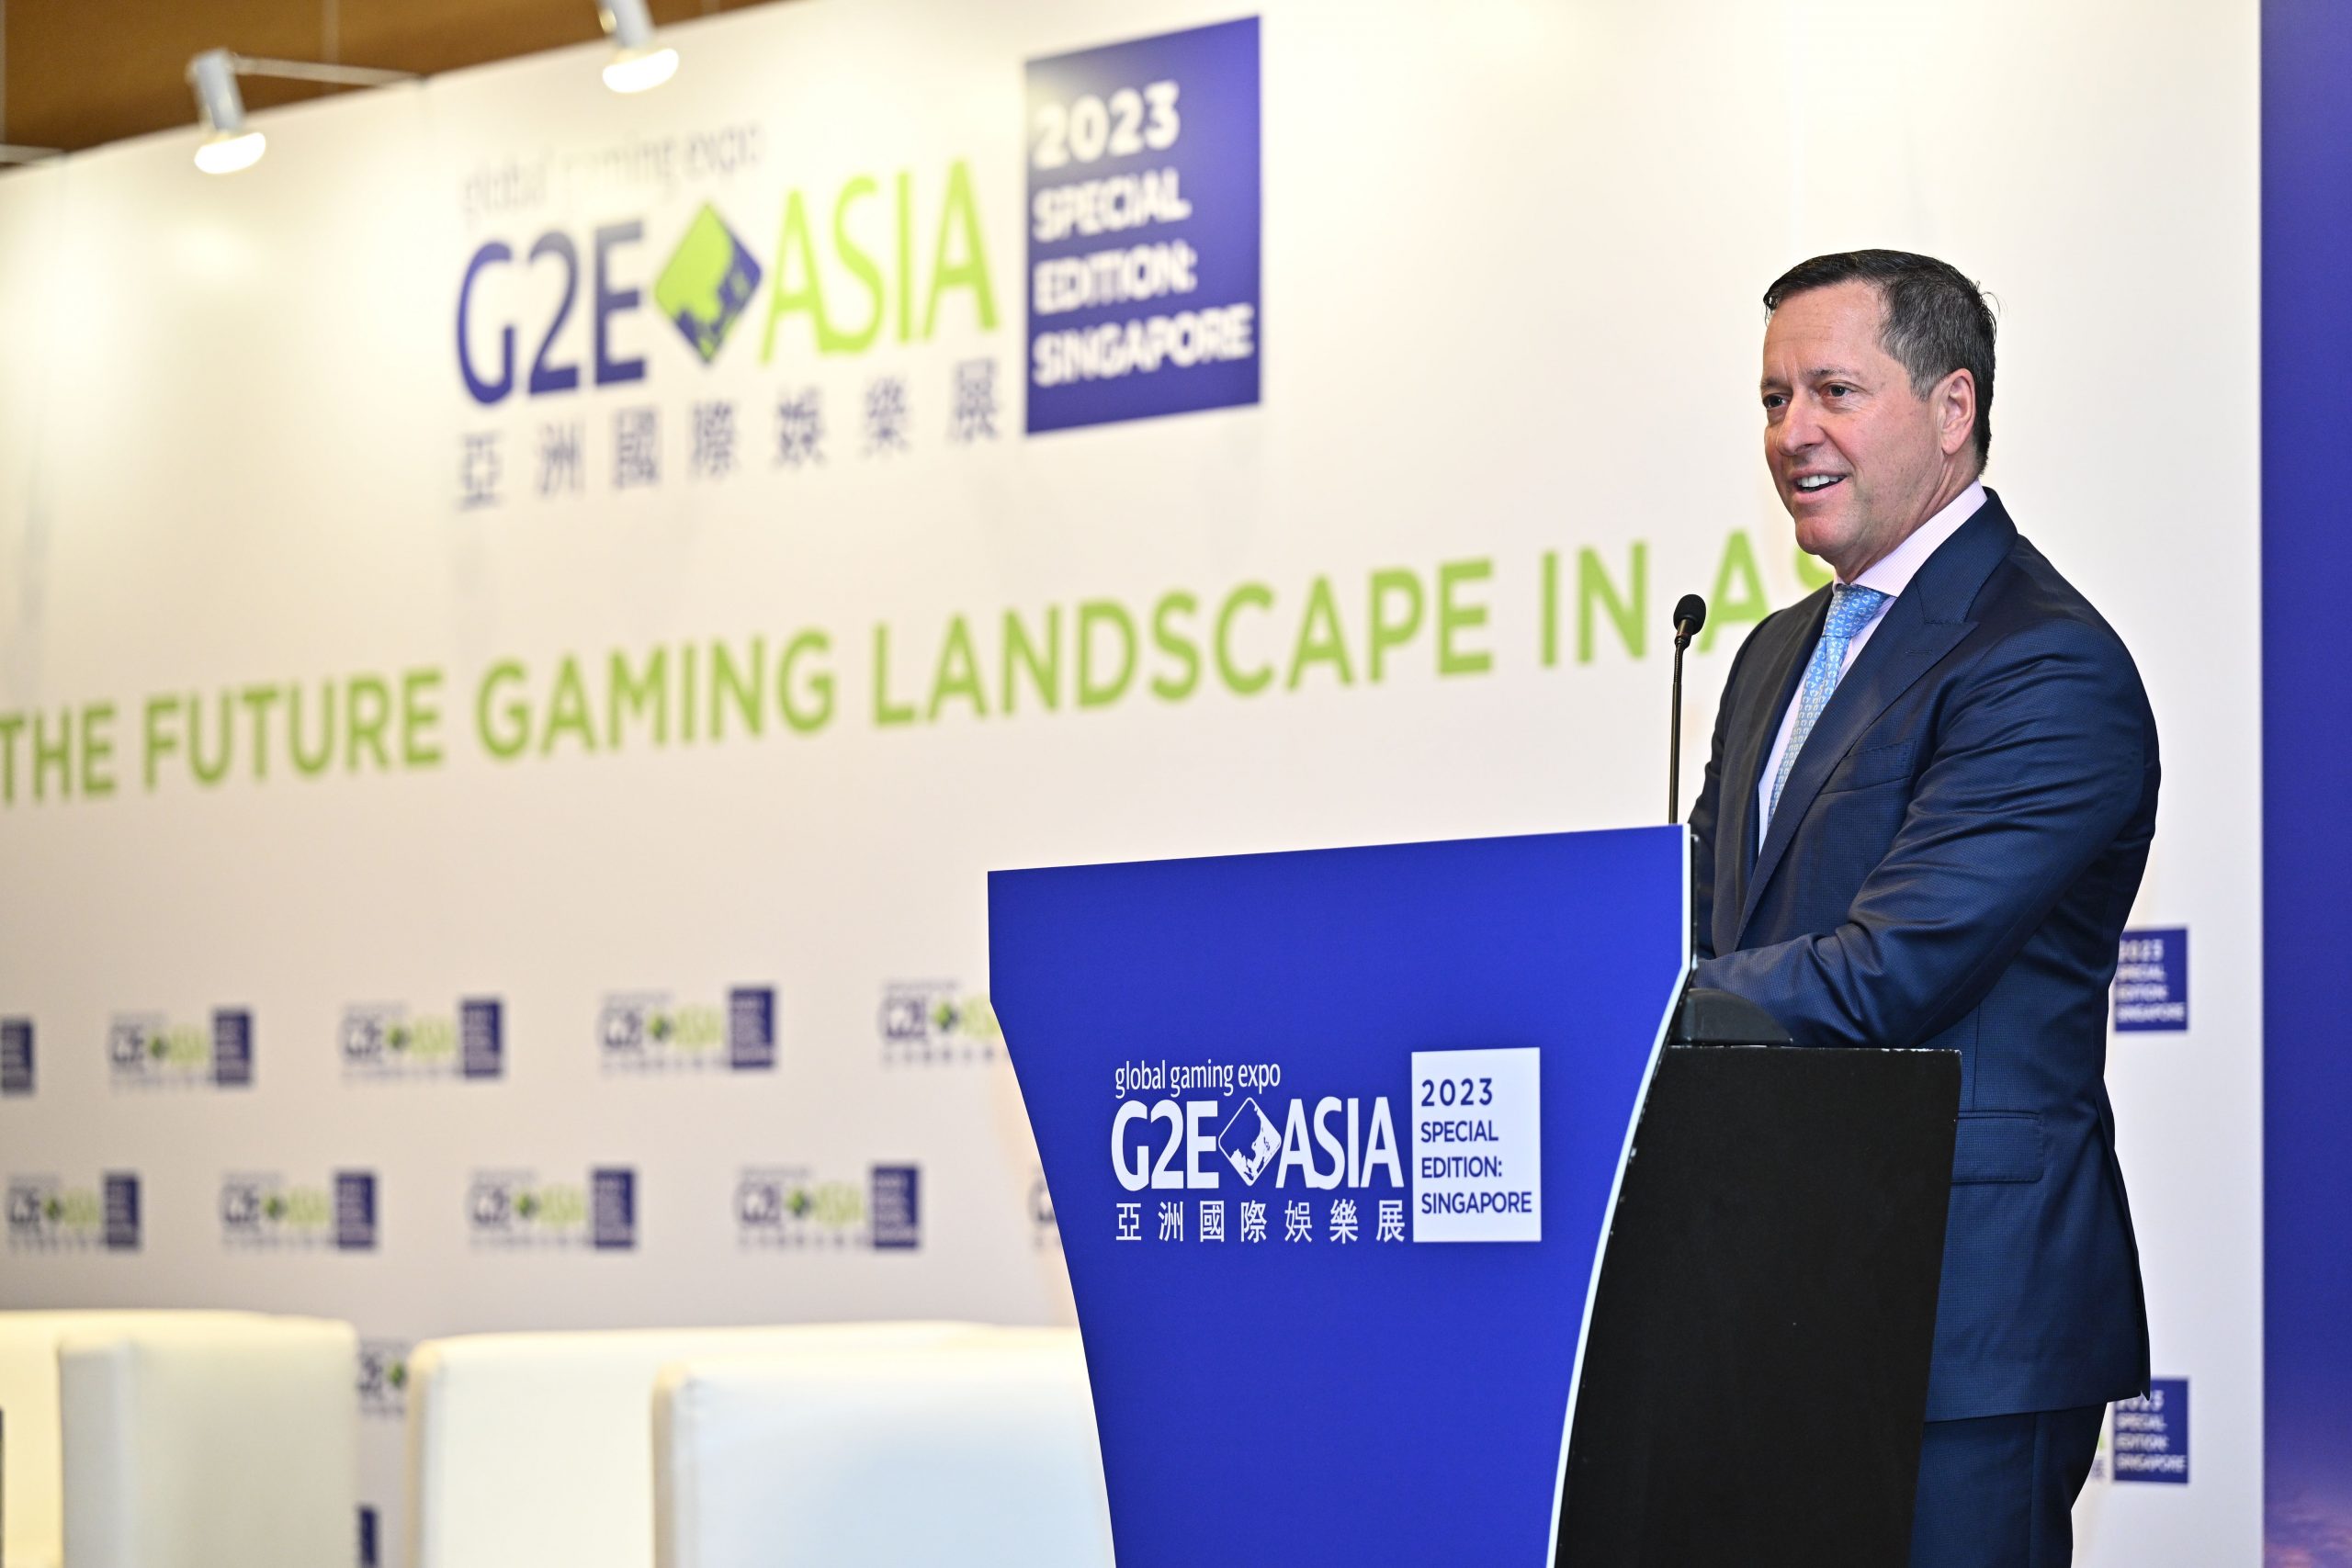 G2E Asia 2023 brings together industry leaders from all over the world